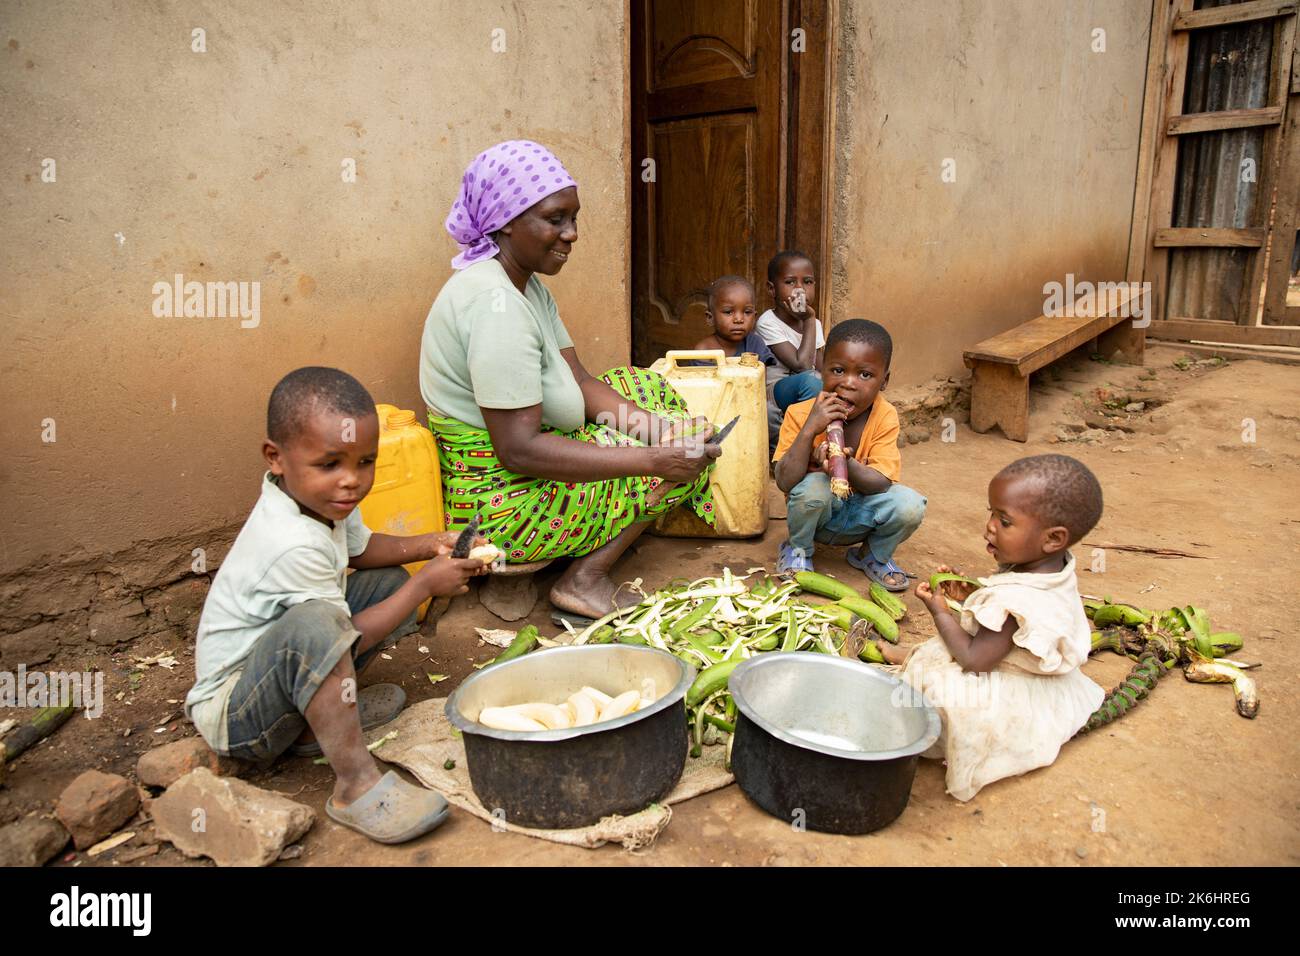 A grandmother prepares a meal of starchy banana (East African highland banana) known locally as Matooke, for her grandchildren in Kasese District, East Africa. Stock Photo